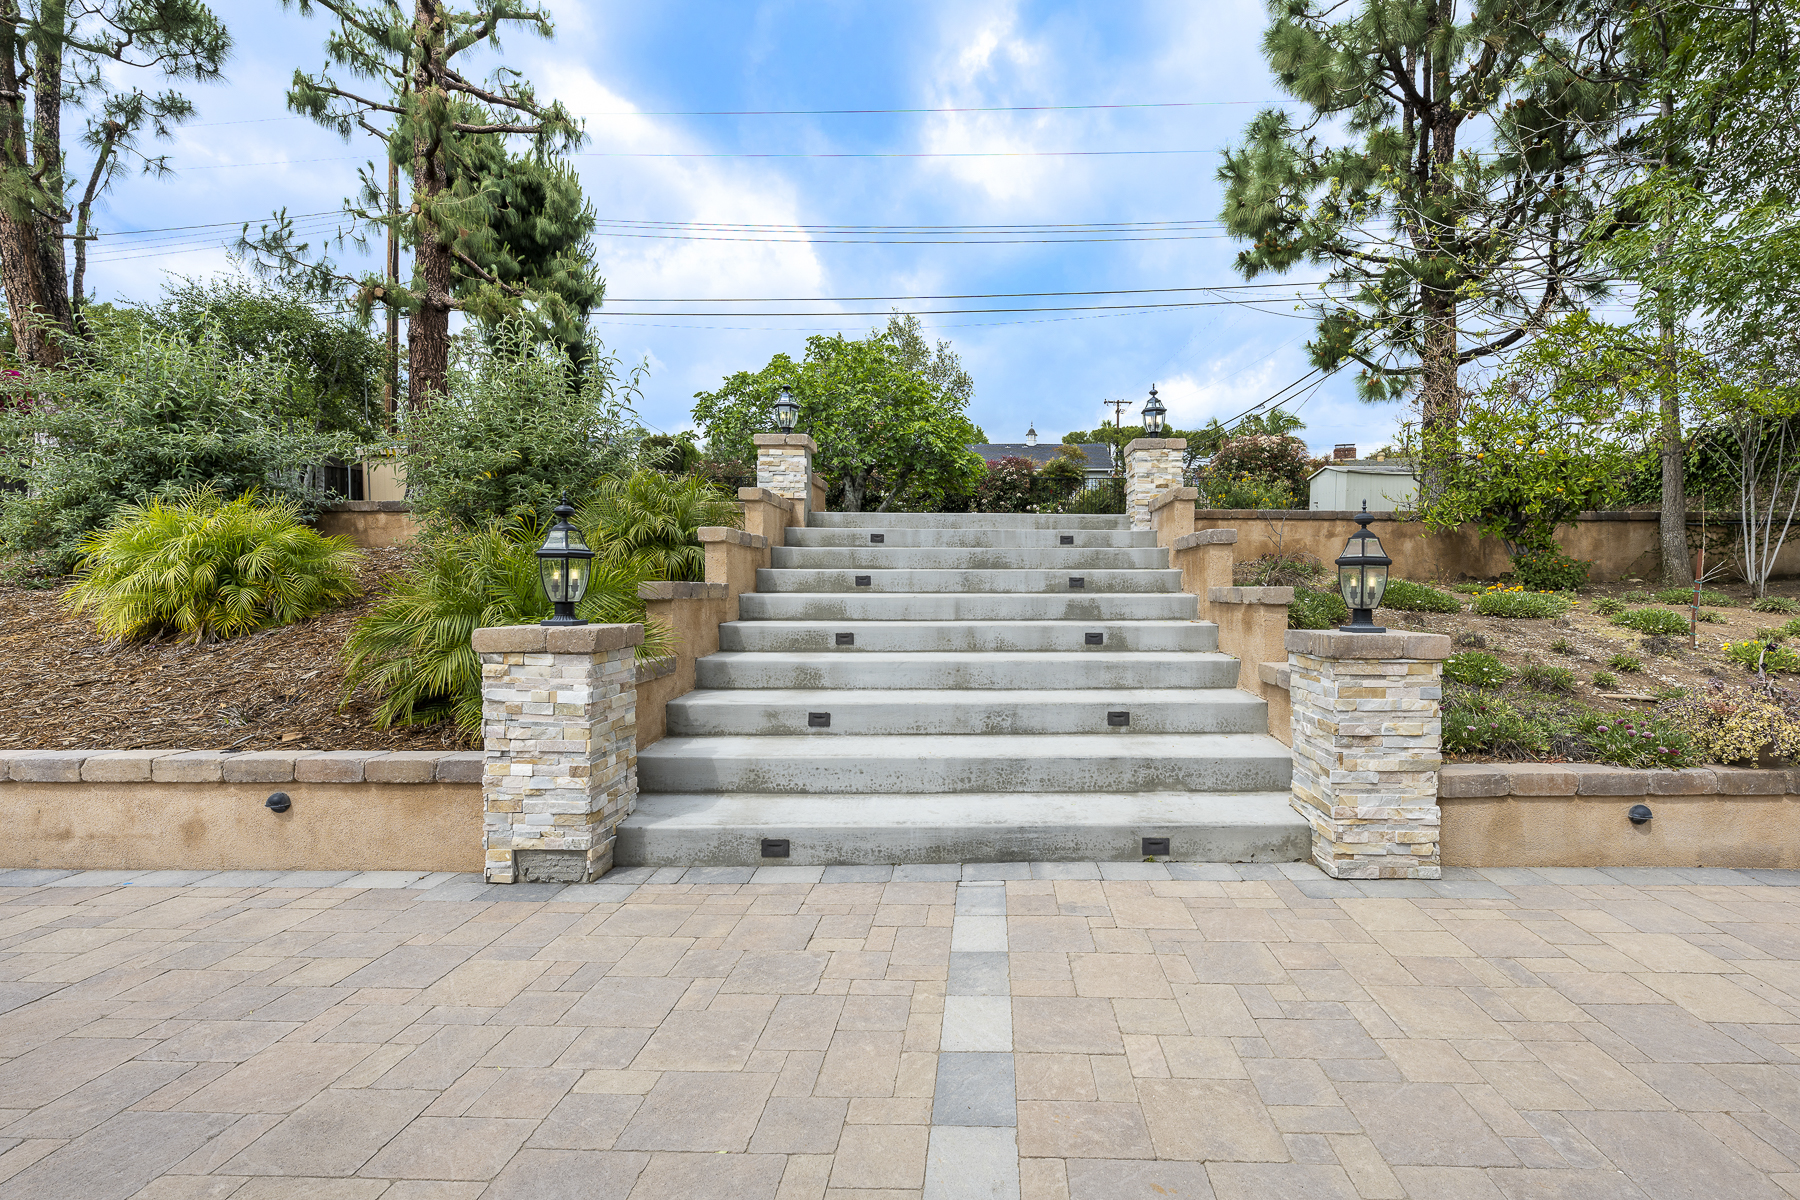 501 Dorothy Drive: Close up view of stairs leading to green space